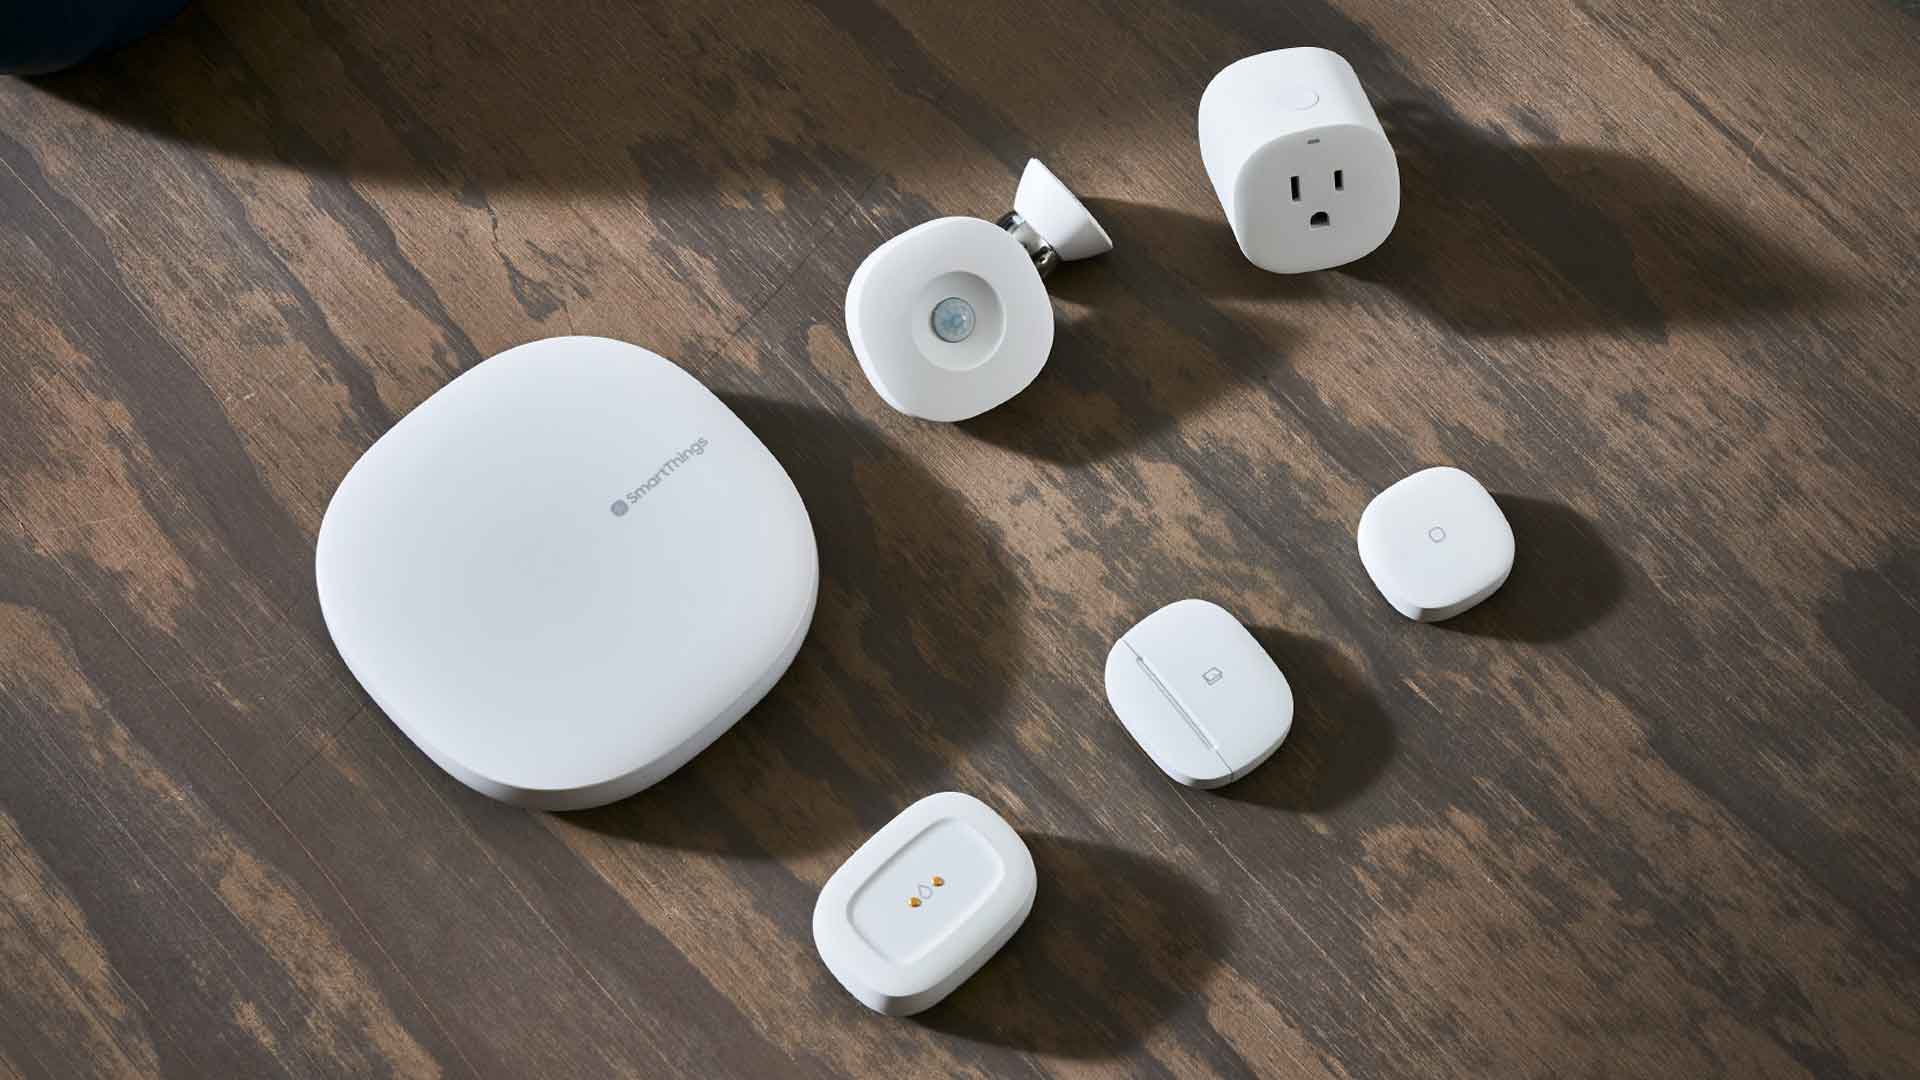 Samsung SmartThings ces 2019